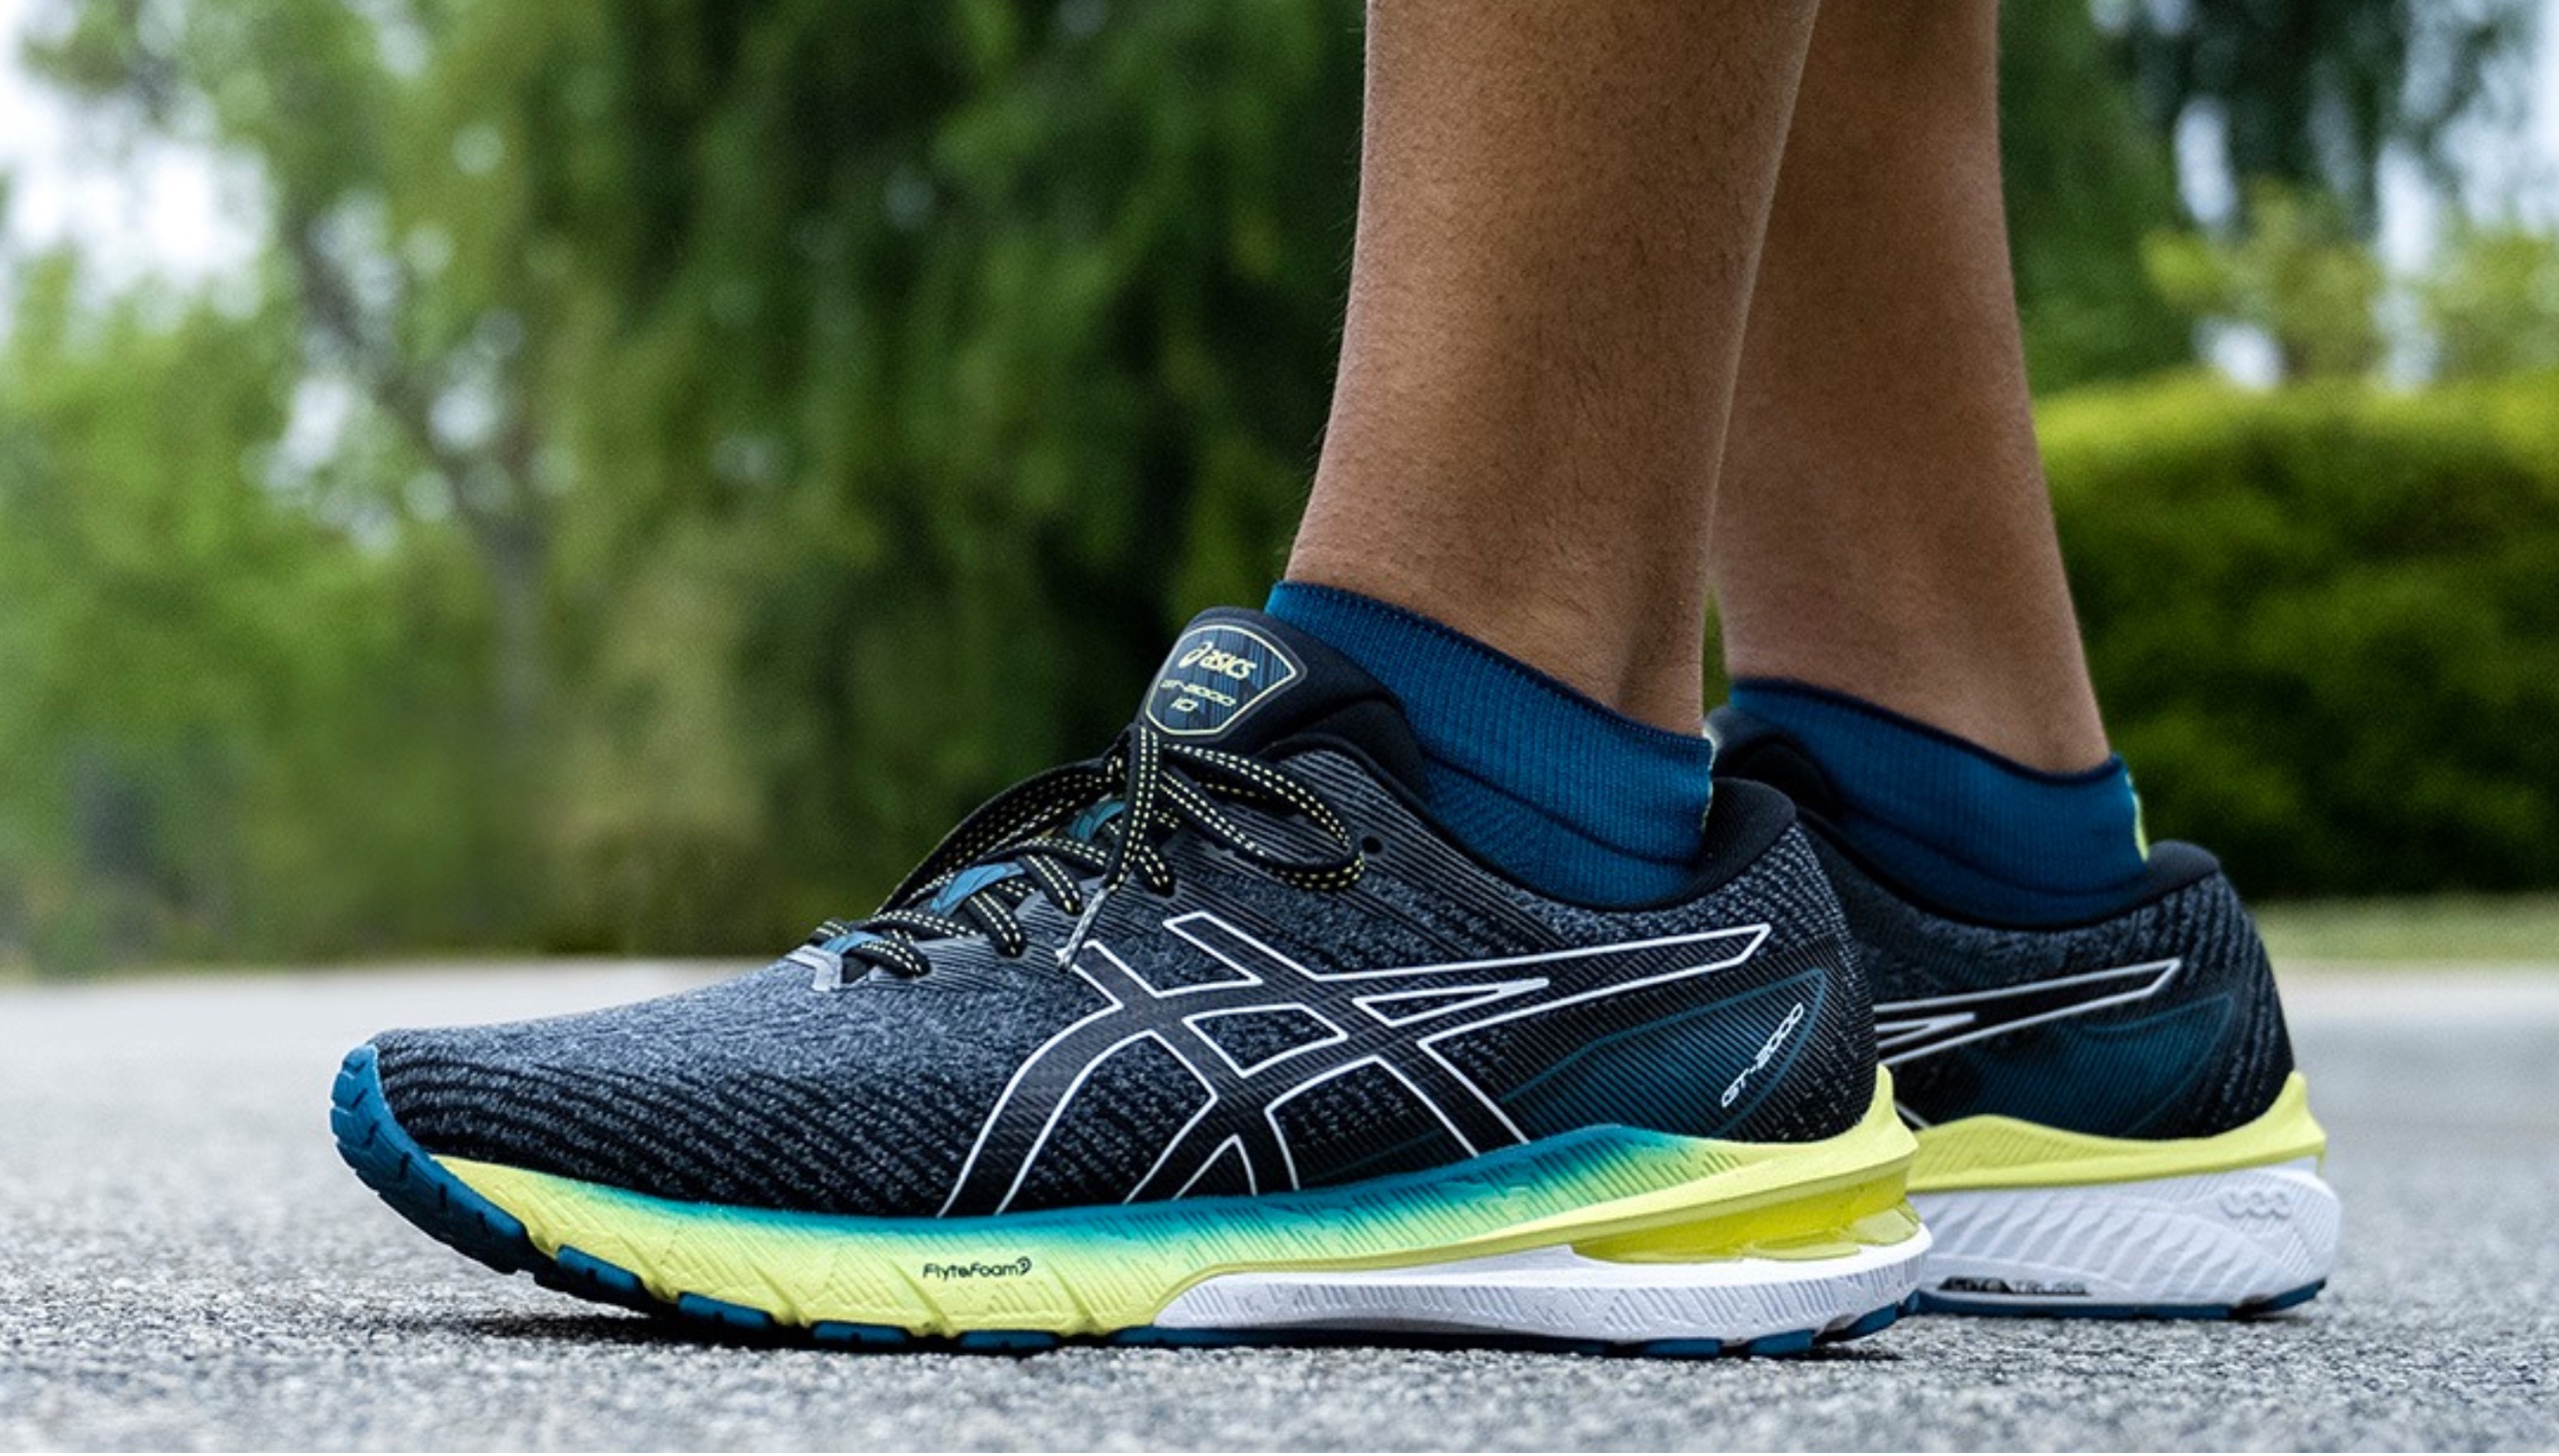 asics Semi-Annual Sale takes up to 50% off running shoes, apparel, more  from $5